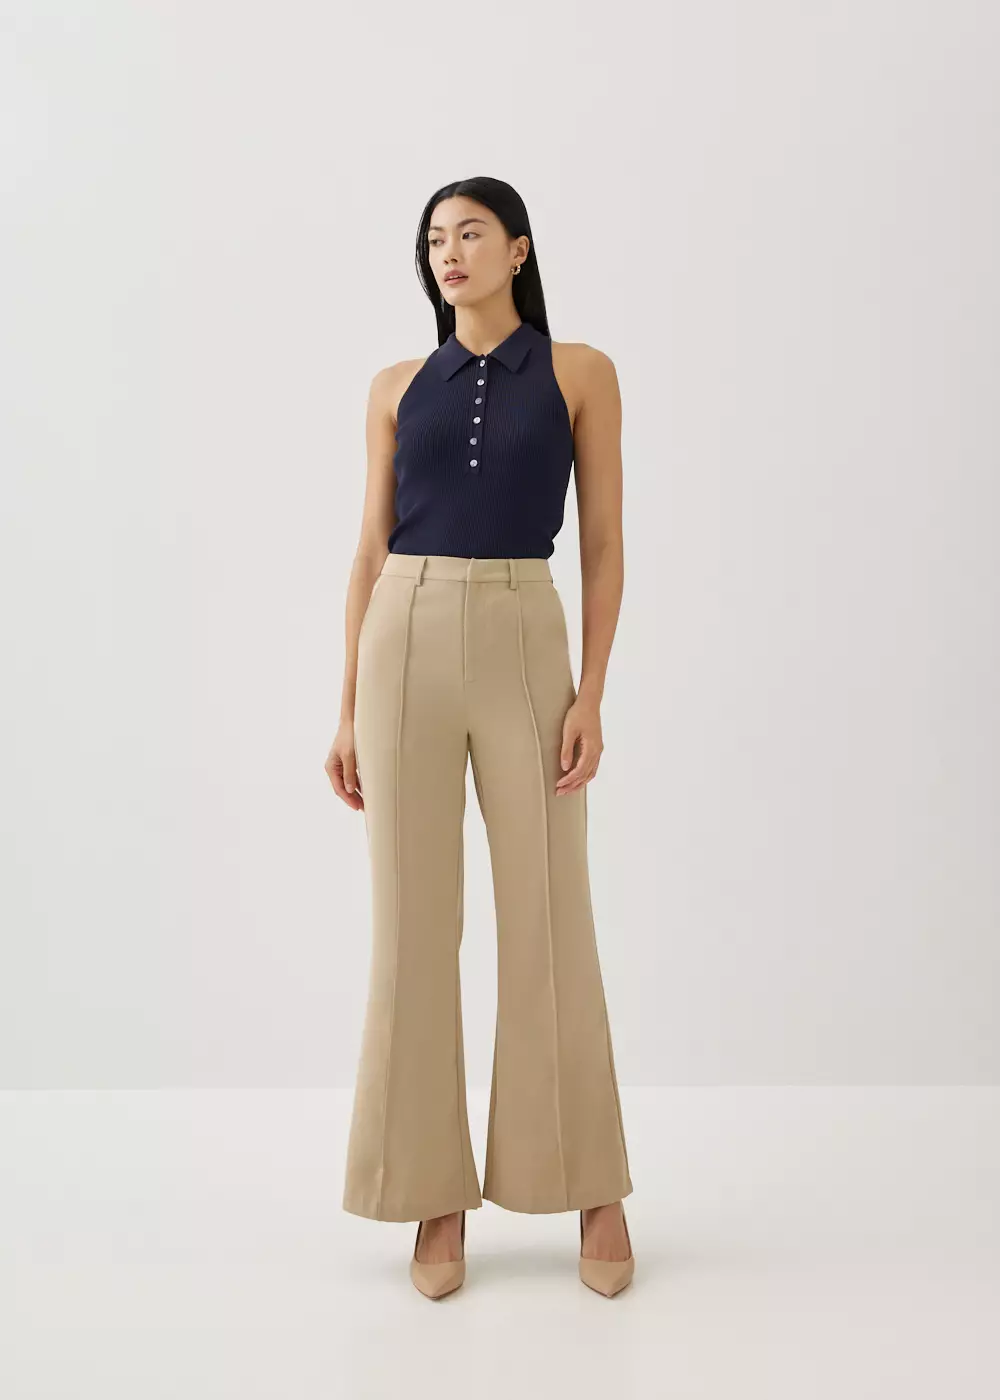 i got my hands on the new and improved Pvara Flare Pants from Love